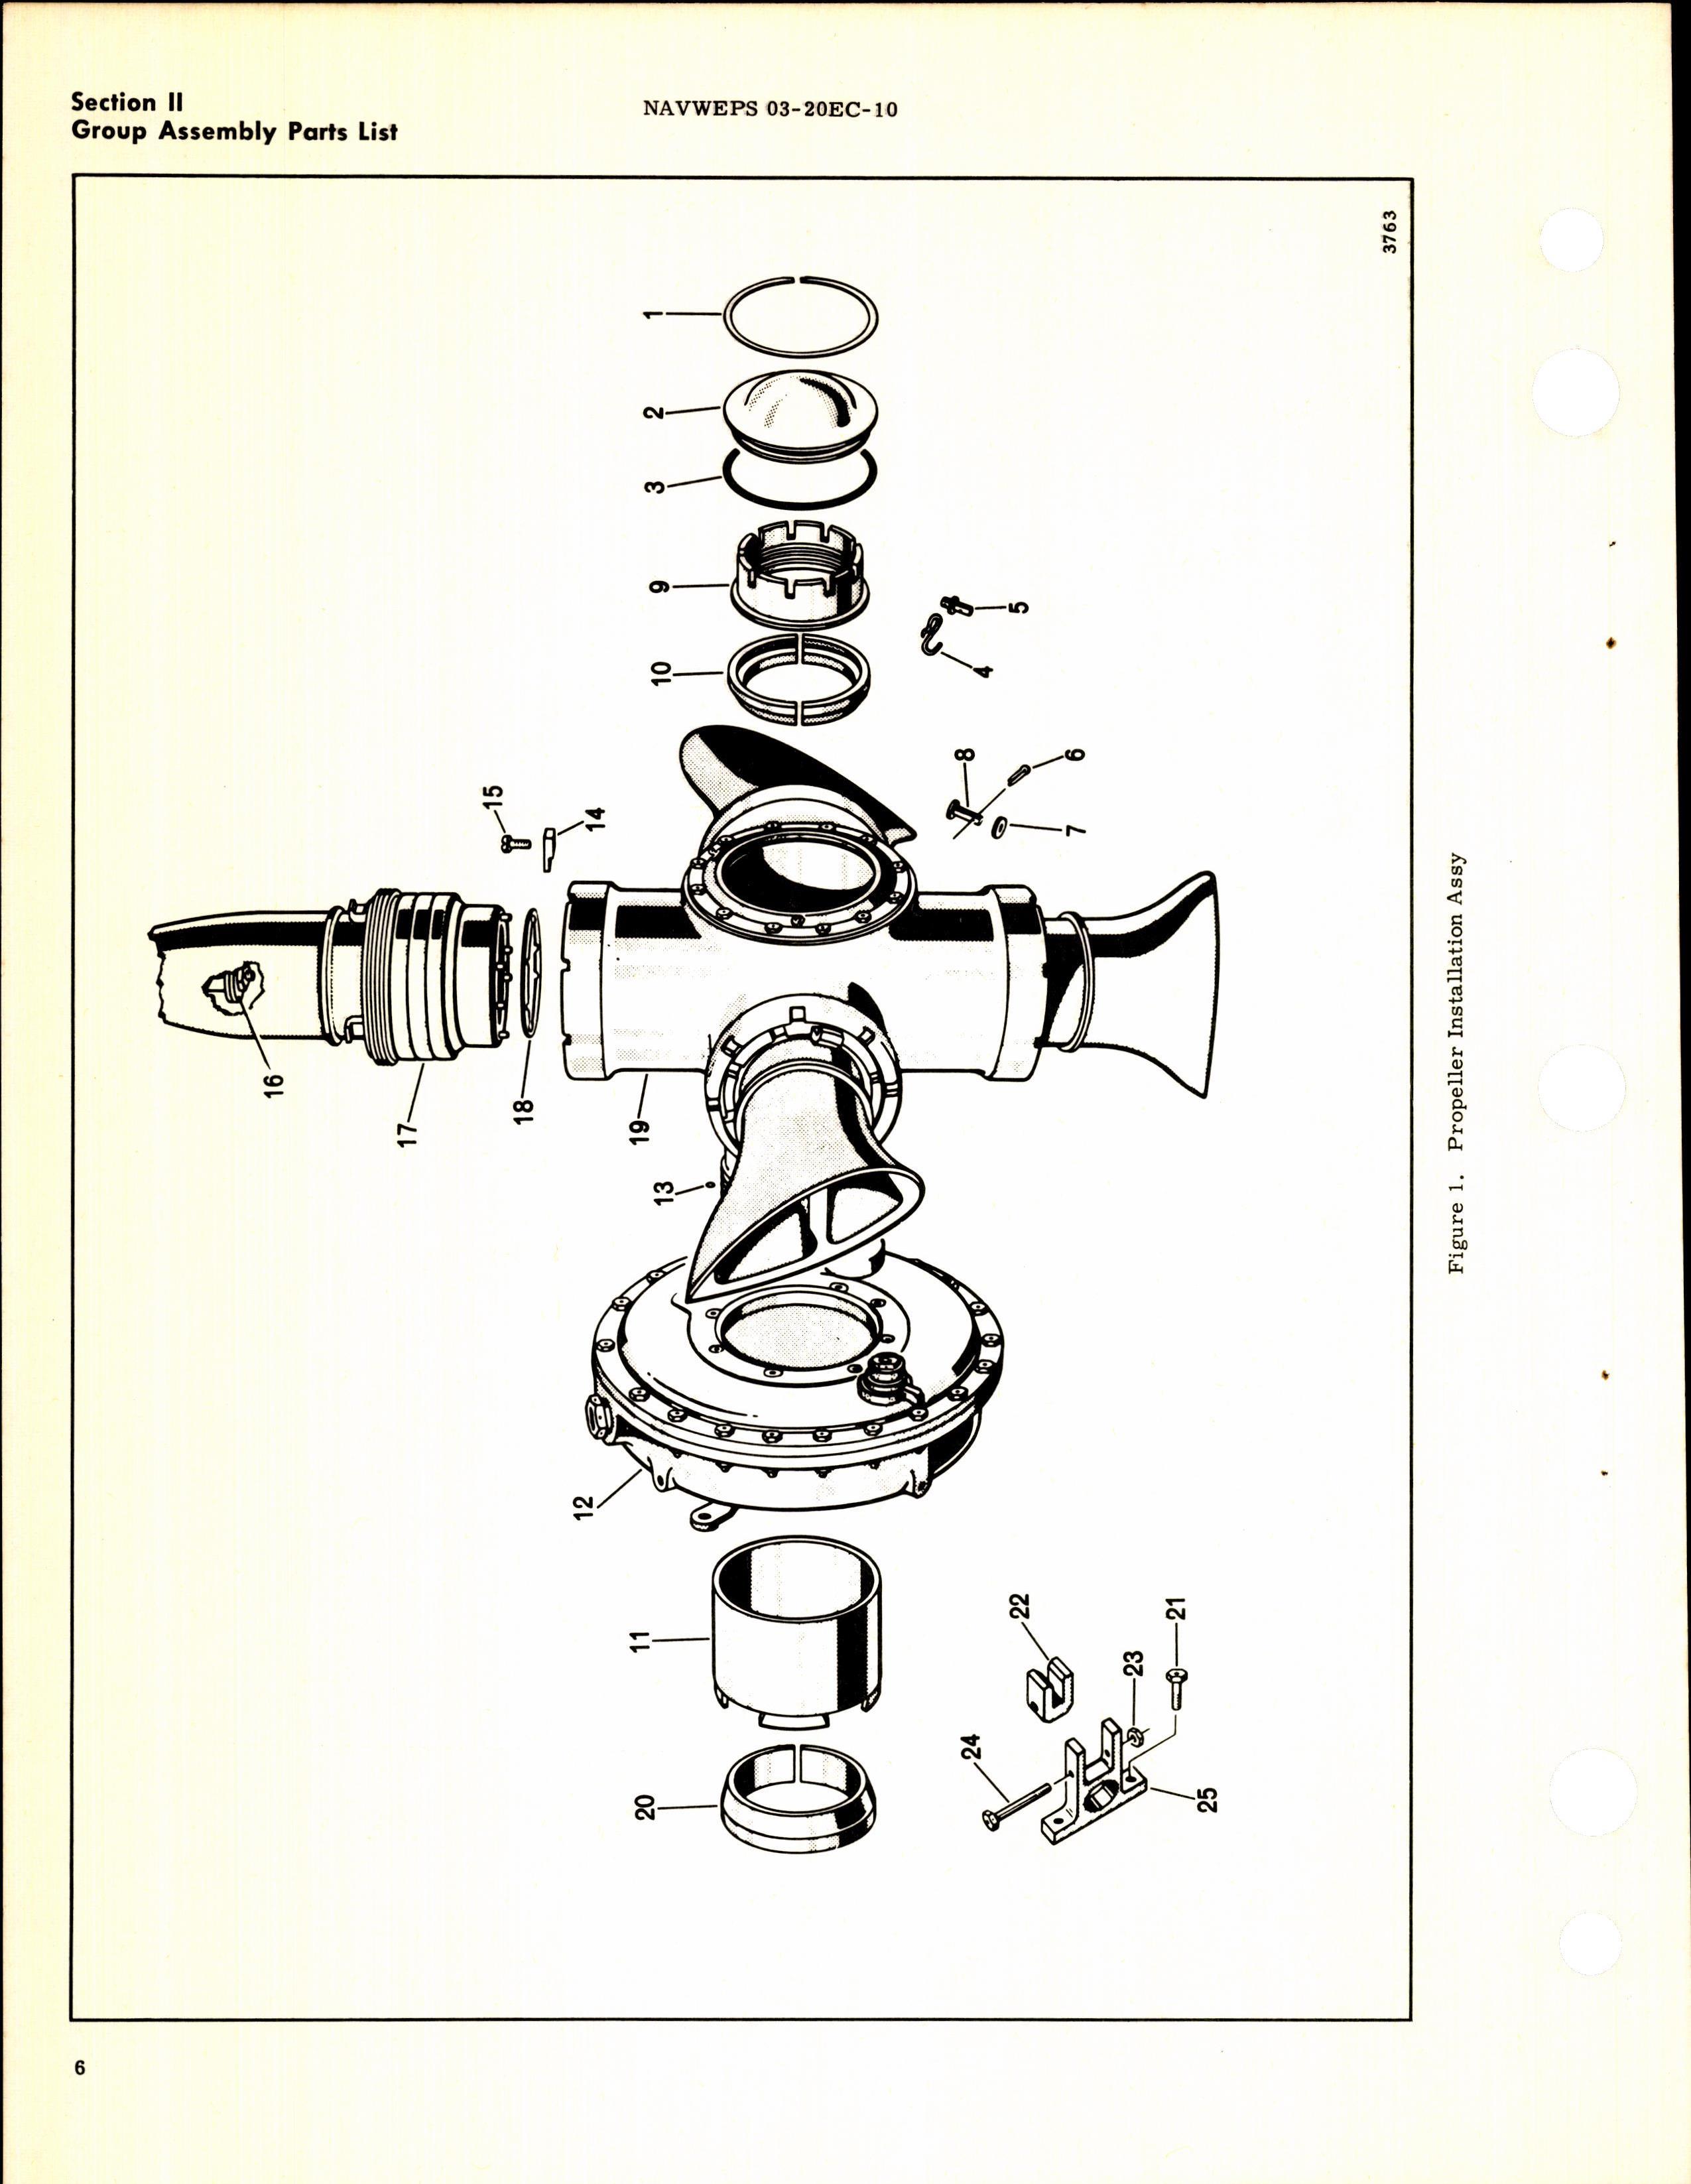 Sample page 10 from AirCorps Library document: Illustrated Parts Breakdown for Model A642-G805 Hydraulic Propeller